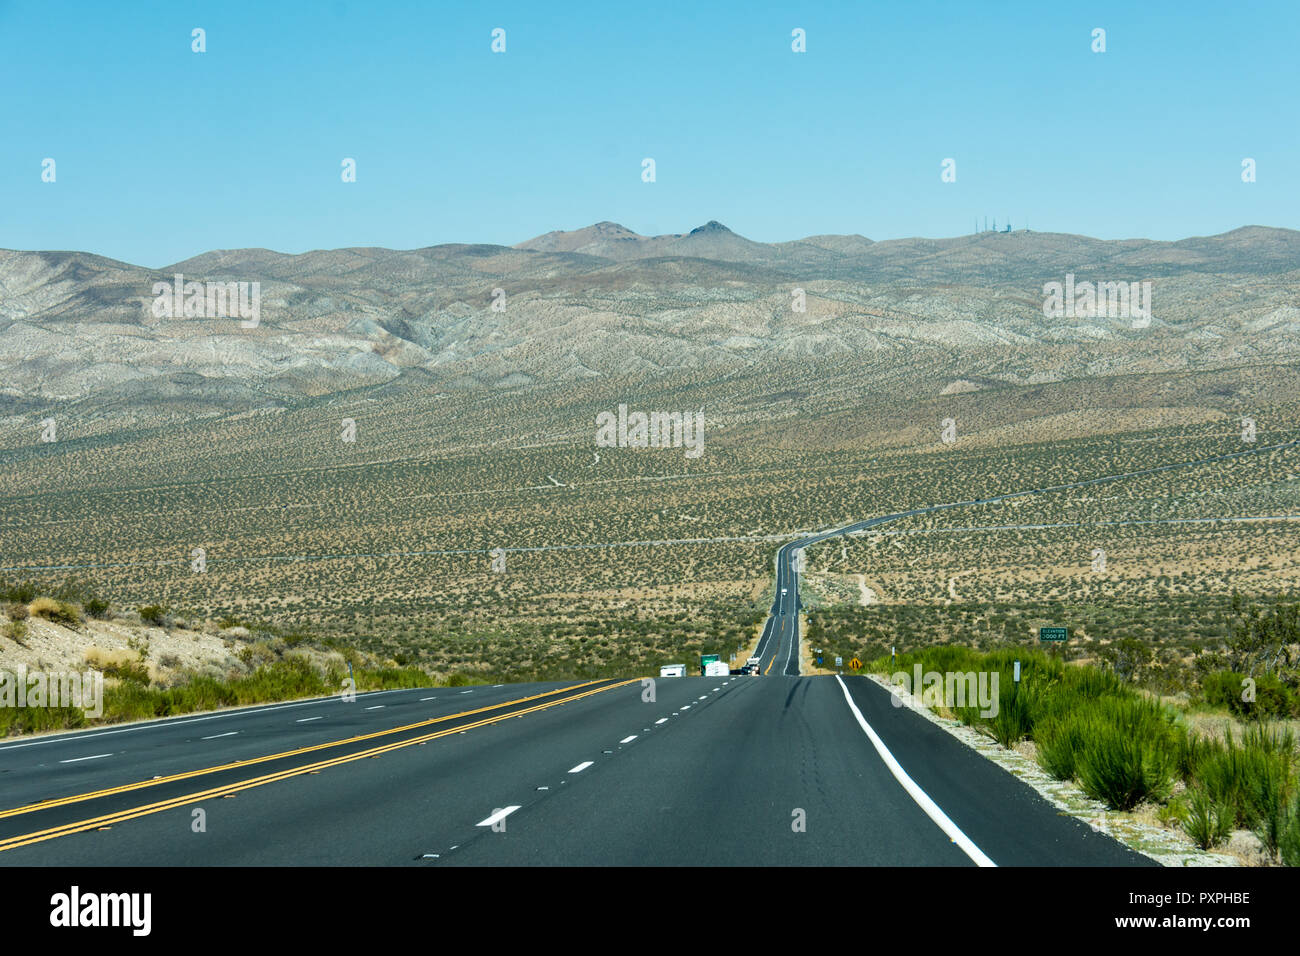 Highway US 395 through the Mojave Desert, with views of desert scenery and foothills. Stock Photo